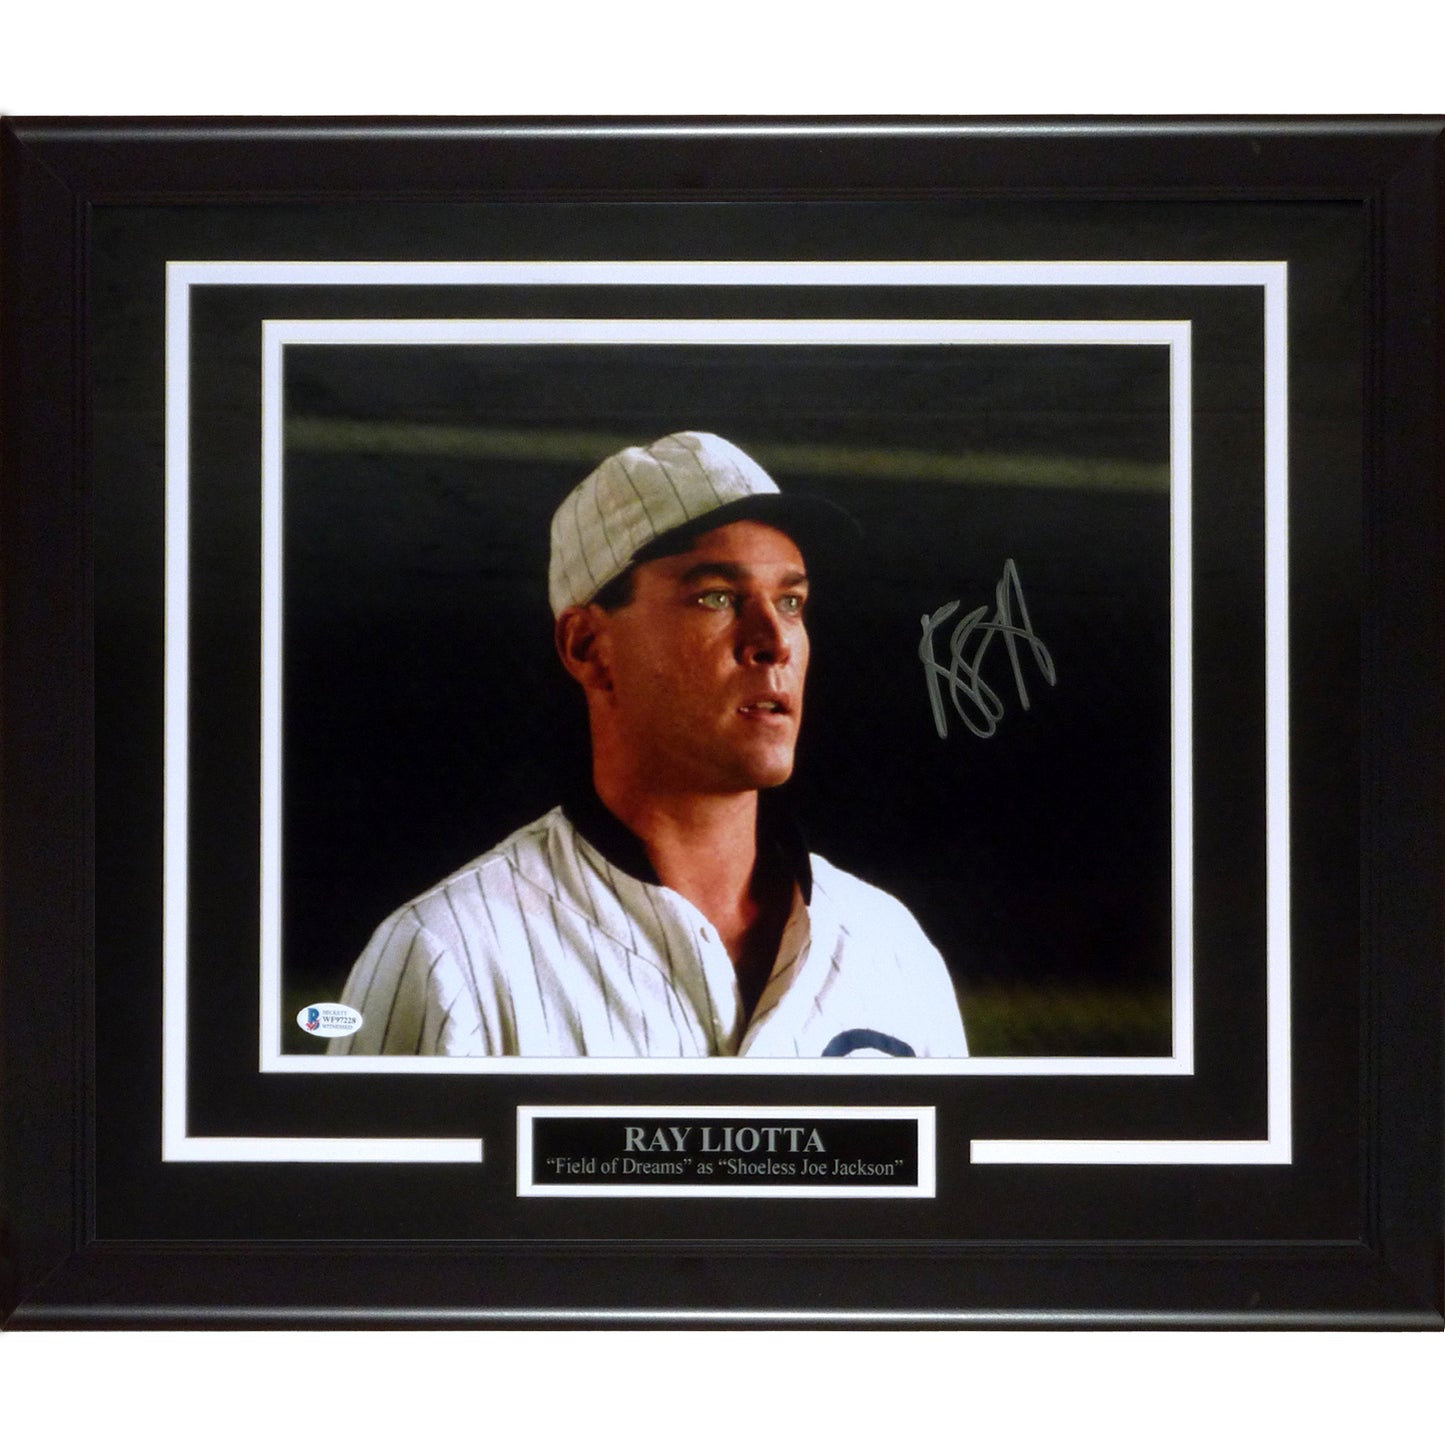 Ray Liotta Autographed Field of Dreams Deluxe Framed 11x14 Photo - Beckett